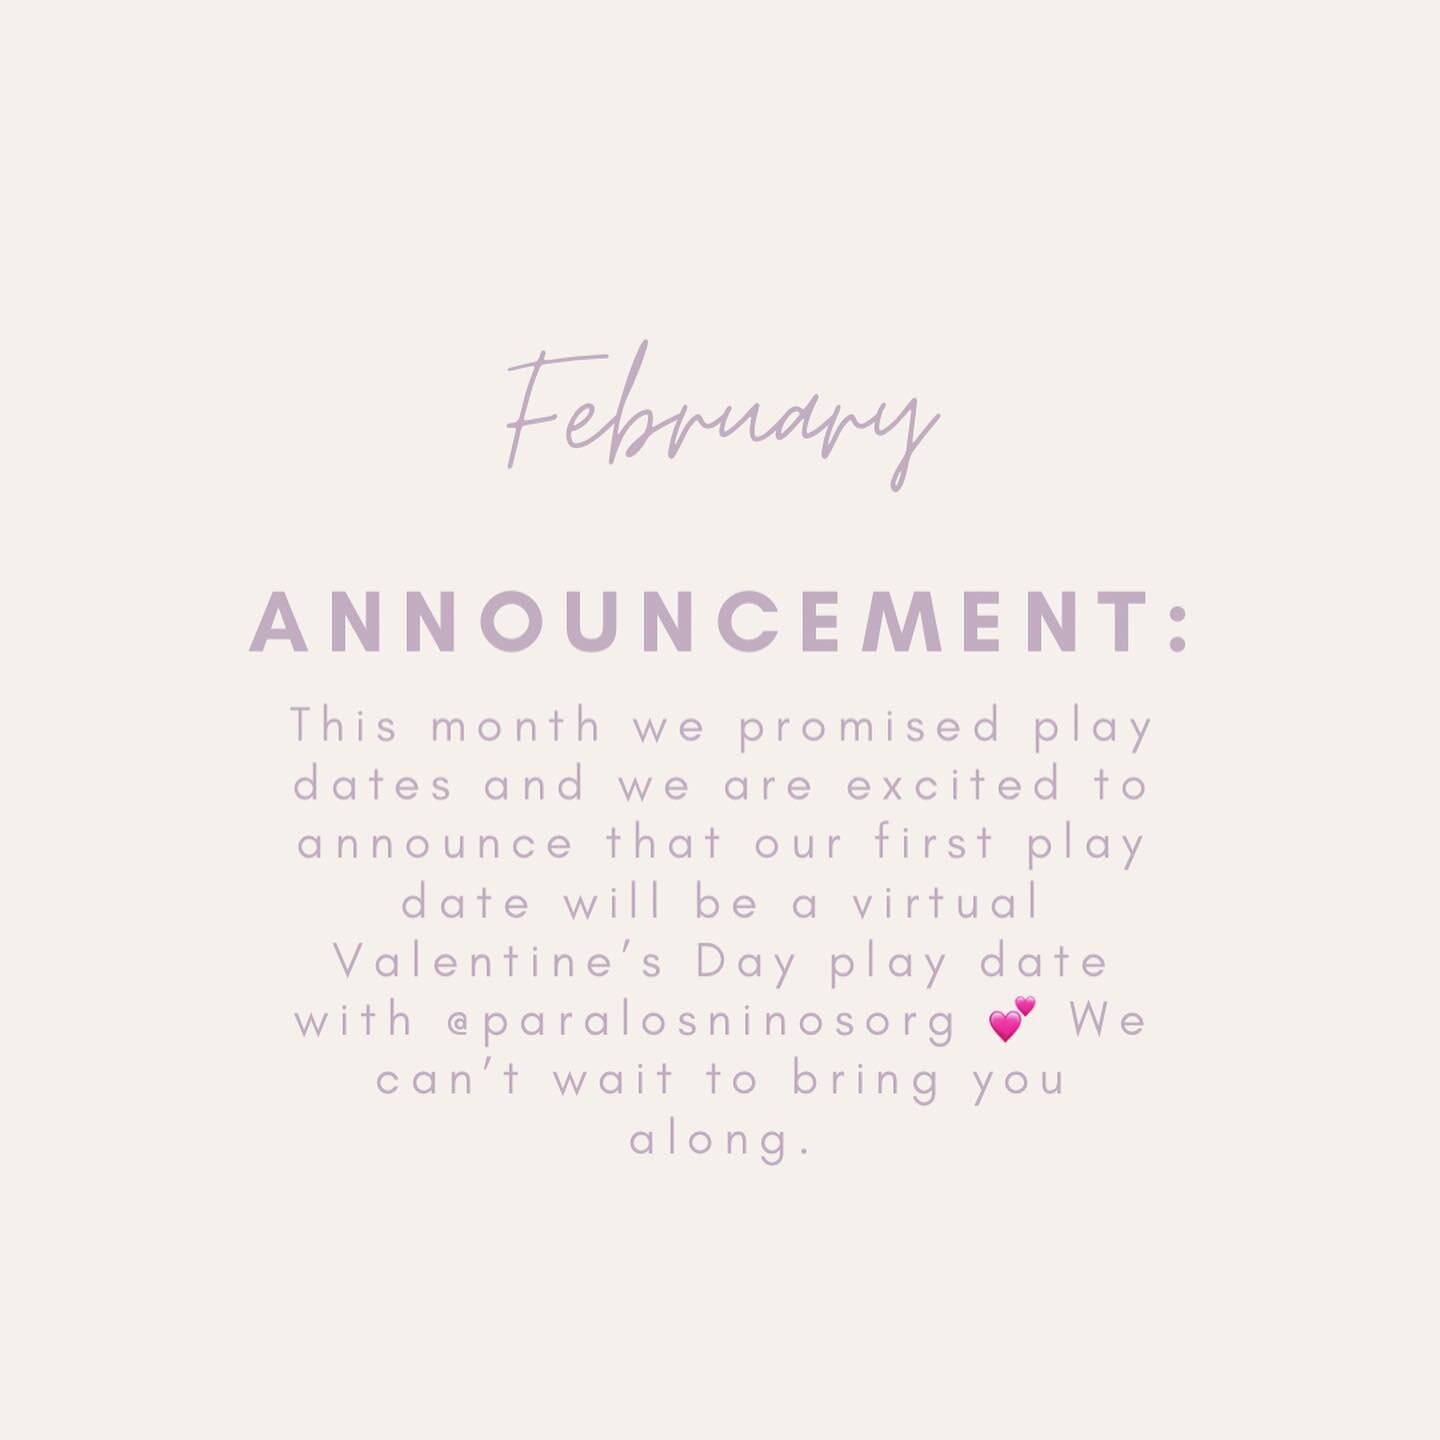 Today we are excited to announce that our first virtual Valentine&rsquo;s Day play date will be next week with @paralosninosorg 💕 We hope throughout the year we can bring these play dates to life &amp; in person but we can&rsquo;t wait to show you w